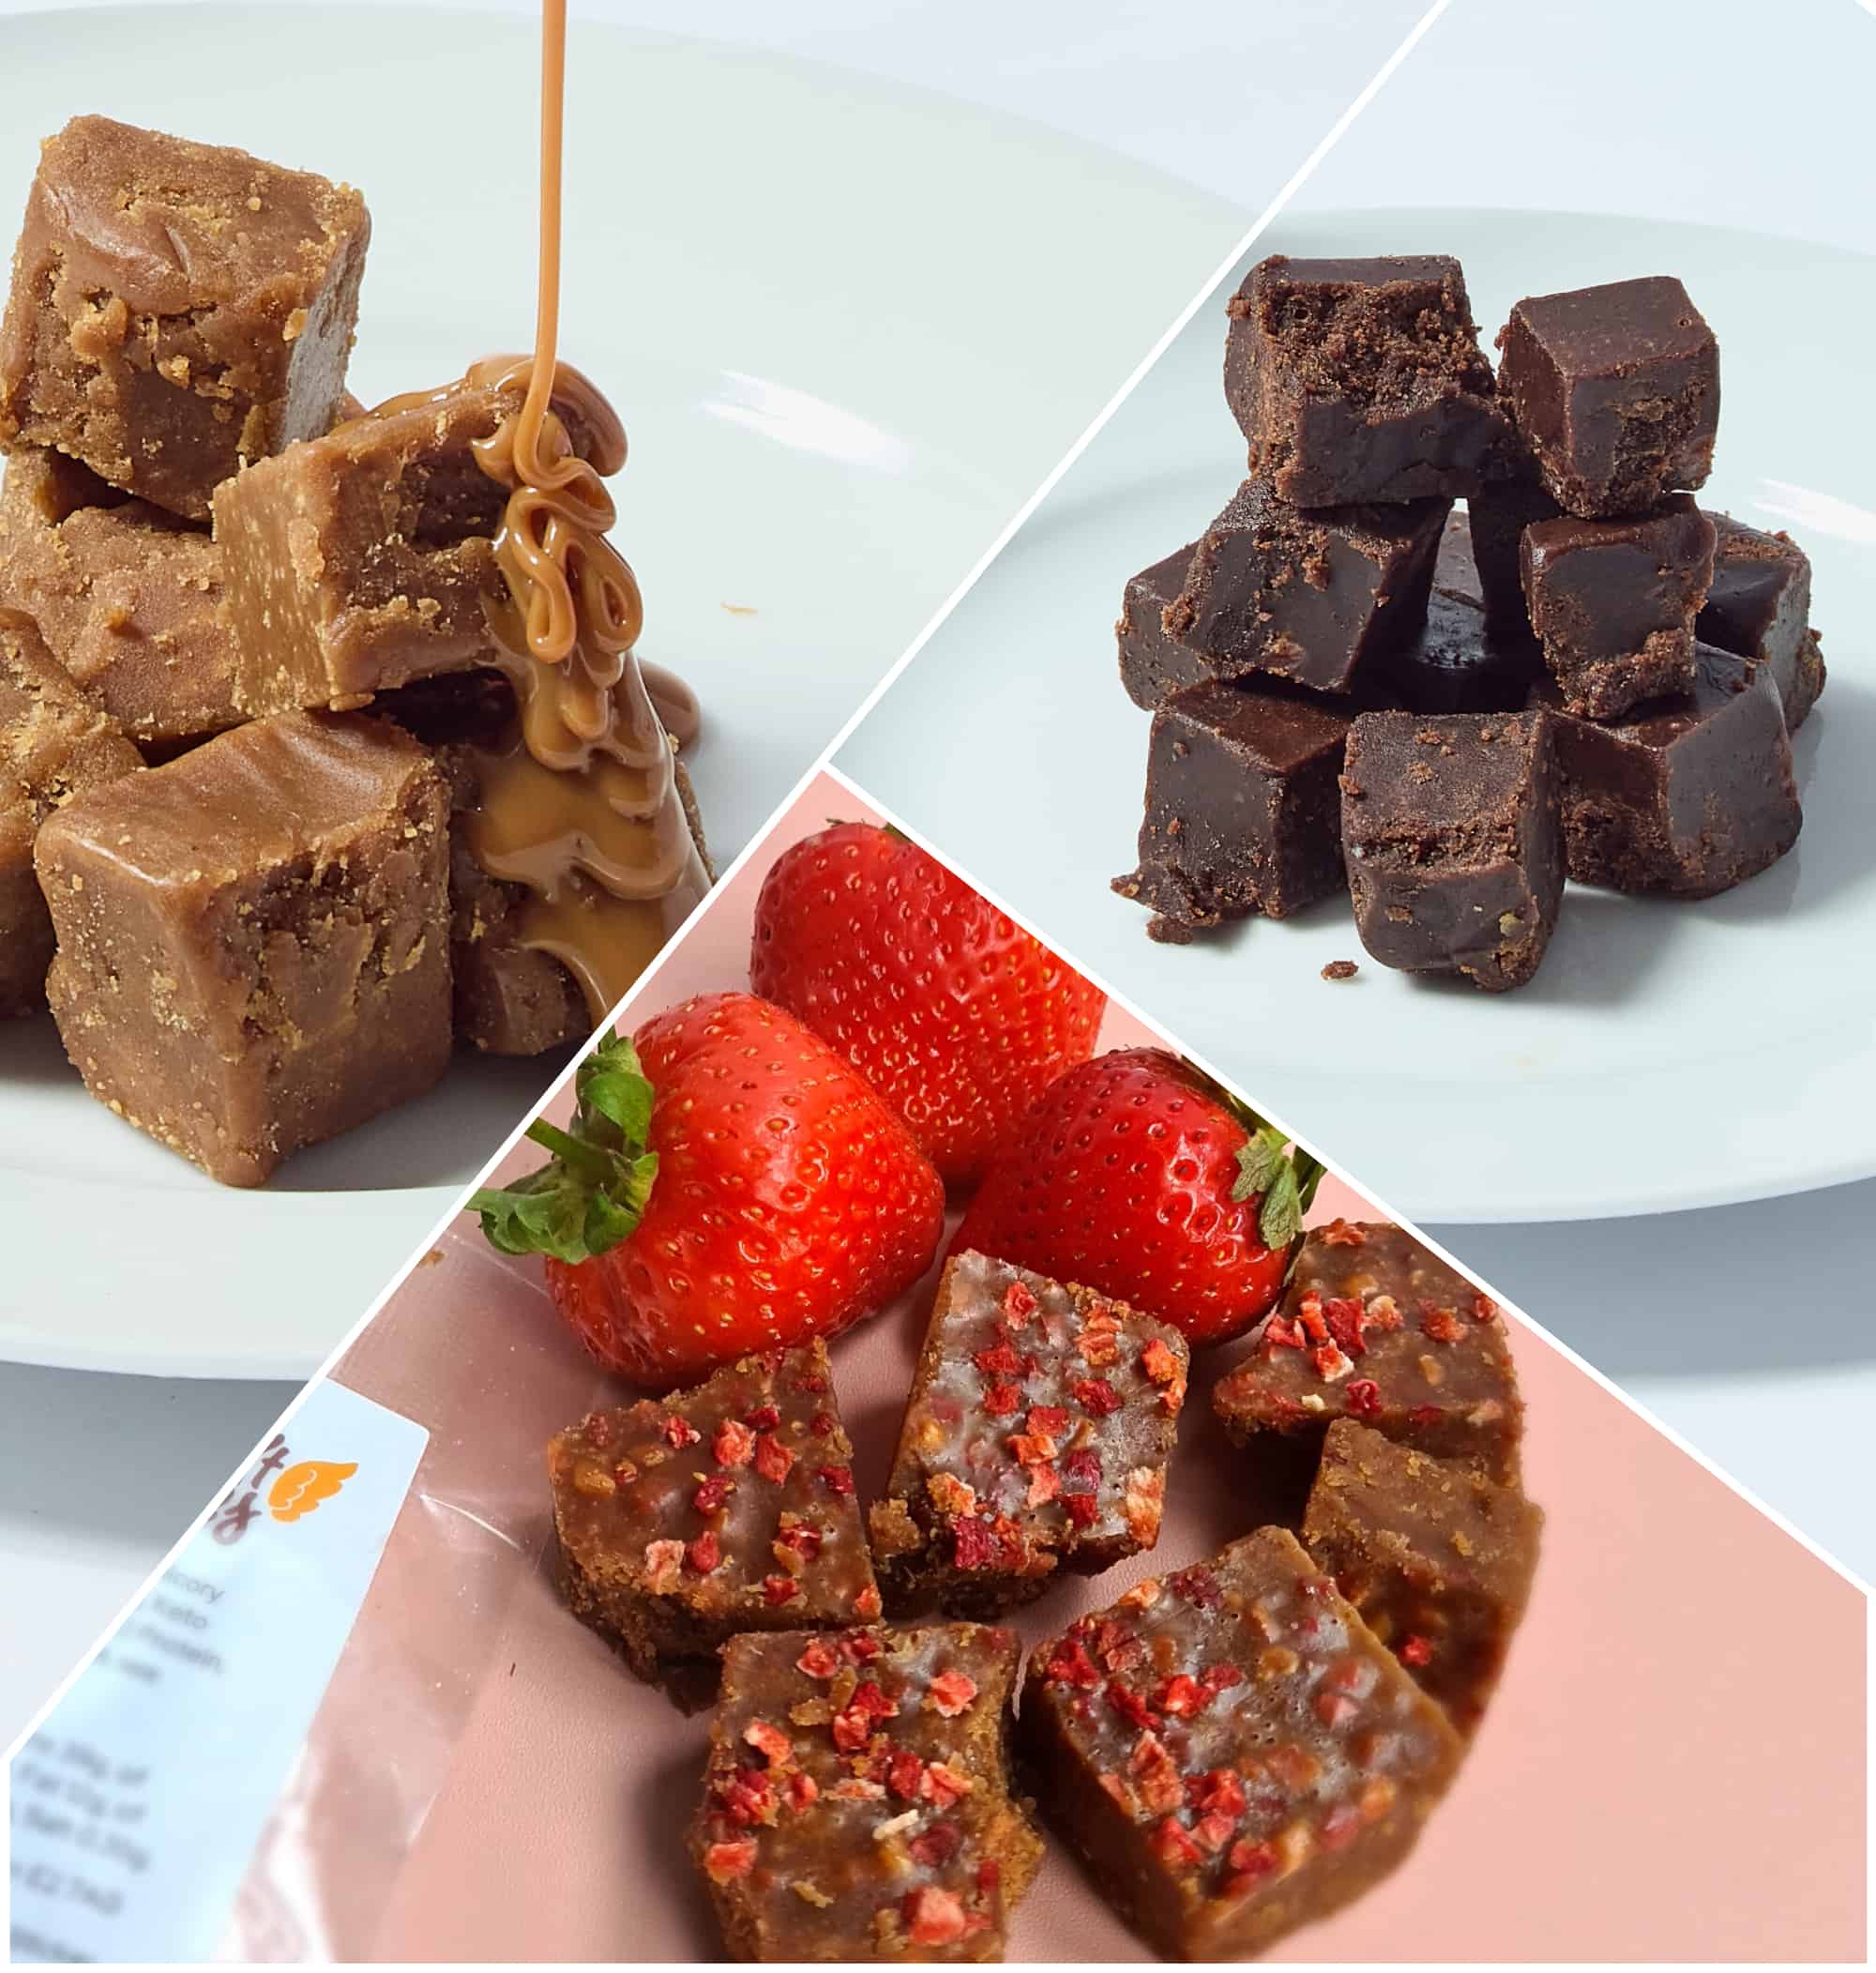 Four pictures of No Guilt Bakes' Keto Fudge Bundle on a plate.